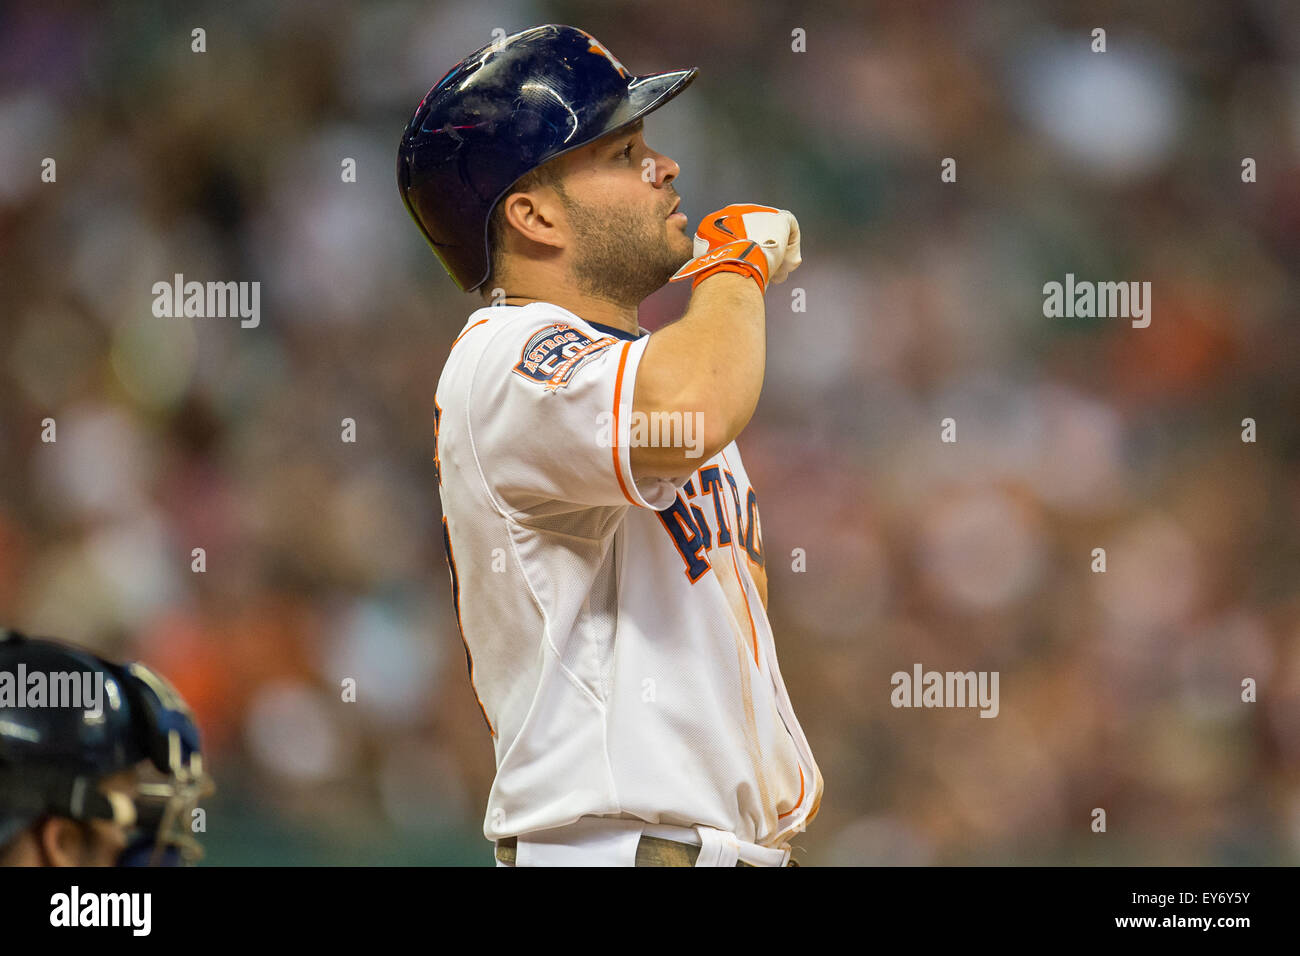 Houston, TX, USA. 22nd July, 2015. Houston Astros second baseman Jose Altuve (27) prepares to bat during the 5th inning of a Major League Baseball game between the Houston Astros and the Boston Red Sox at Minute Maid Park in Houston, TX. Trask Smith/CSM/Alamy Live News Stock Photo